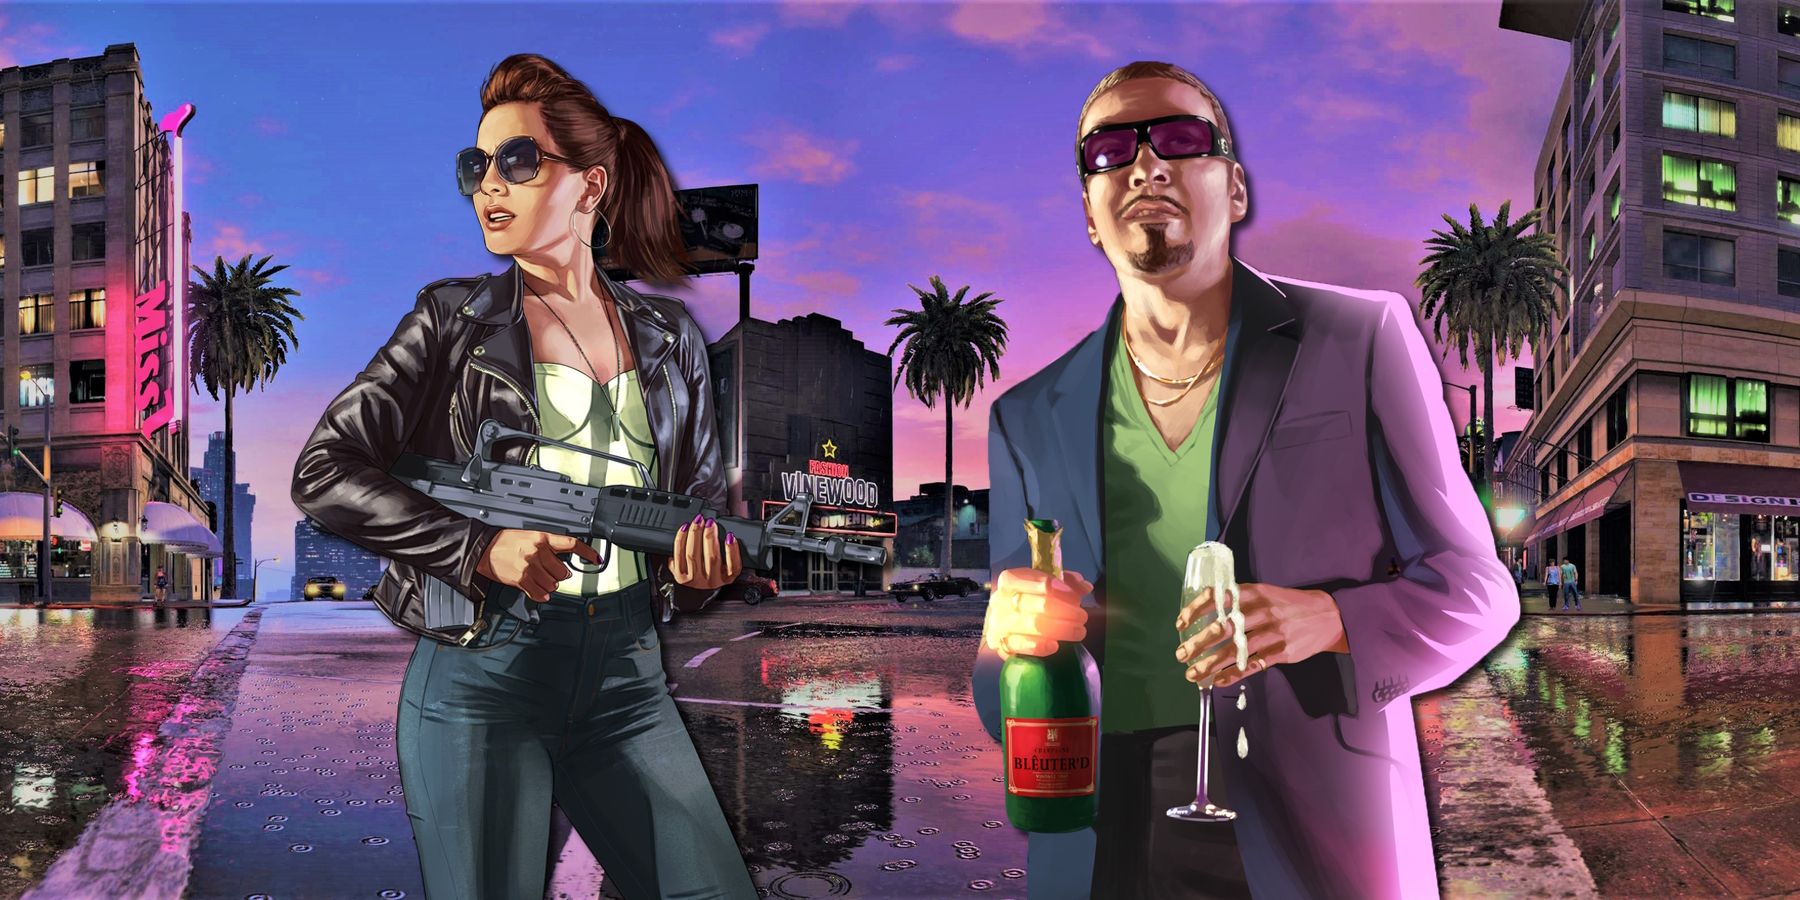 Grand Theft Auto 6 may be better off as “Thelma and Louise” than “Bonnie and Clyde”